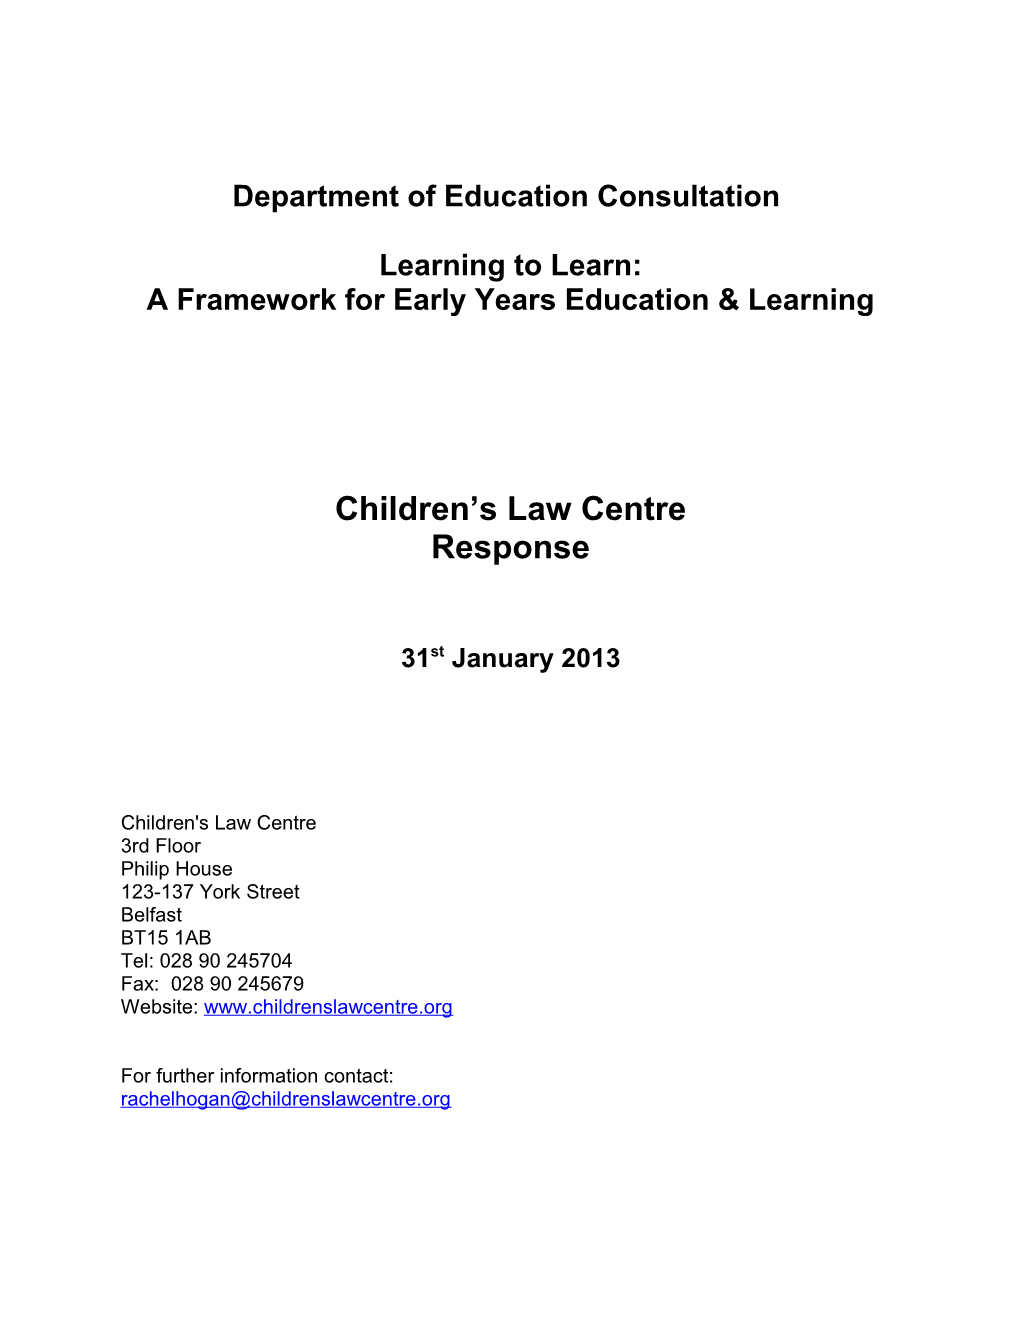 A Framework for Early Years Education & Learning